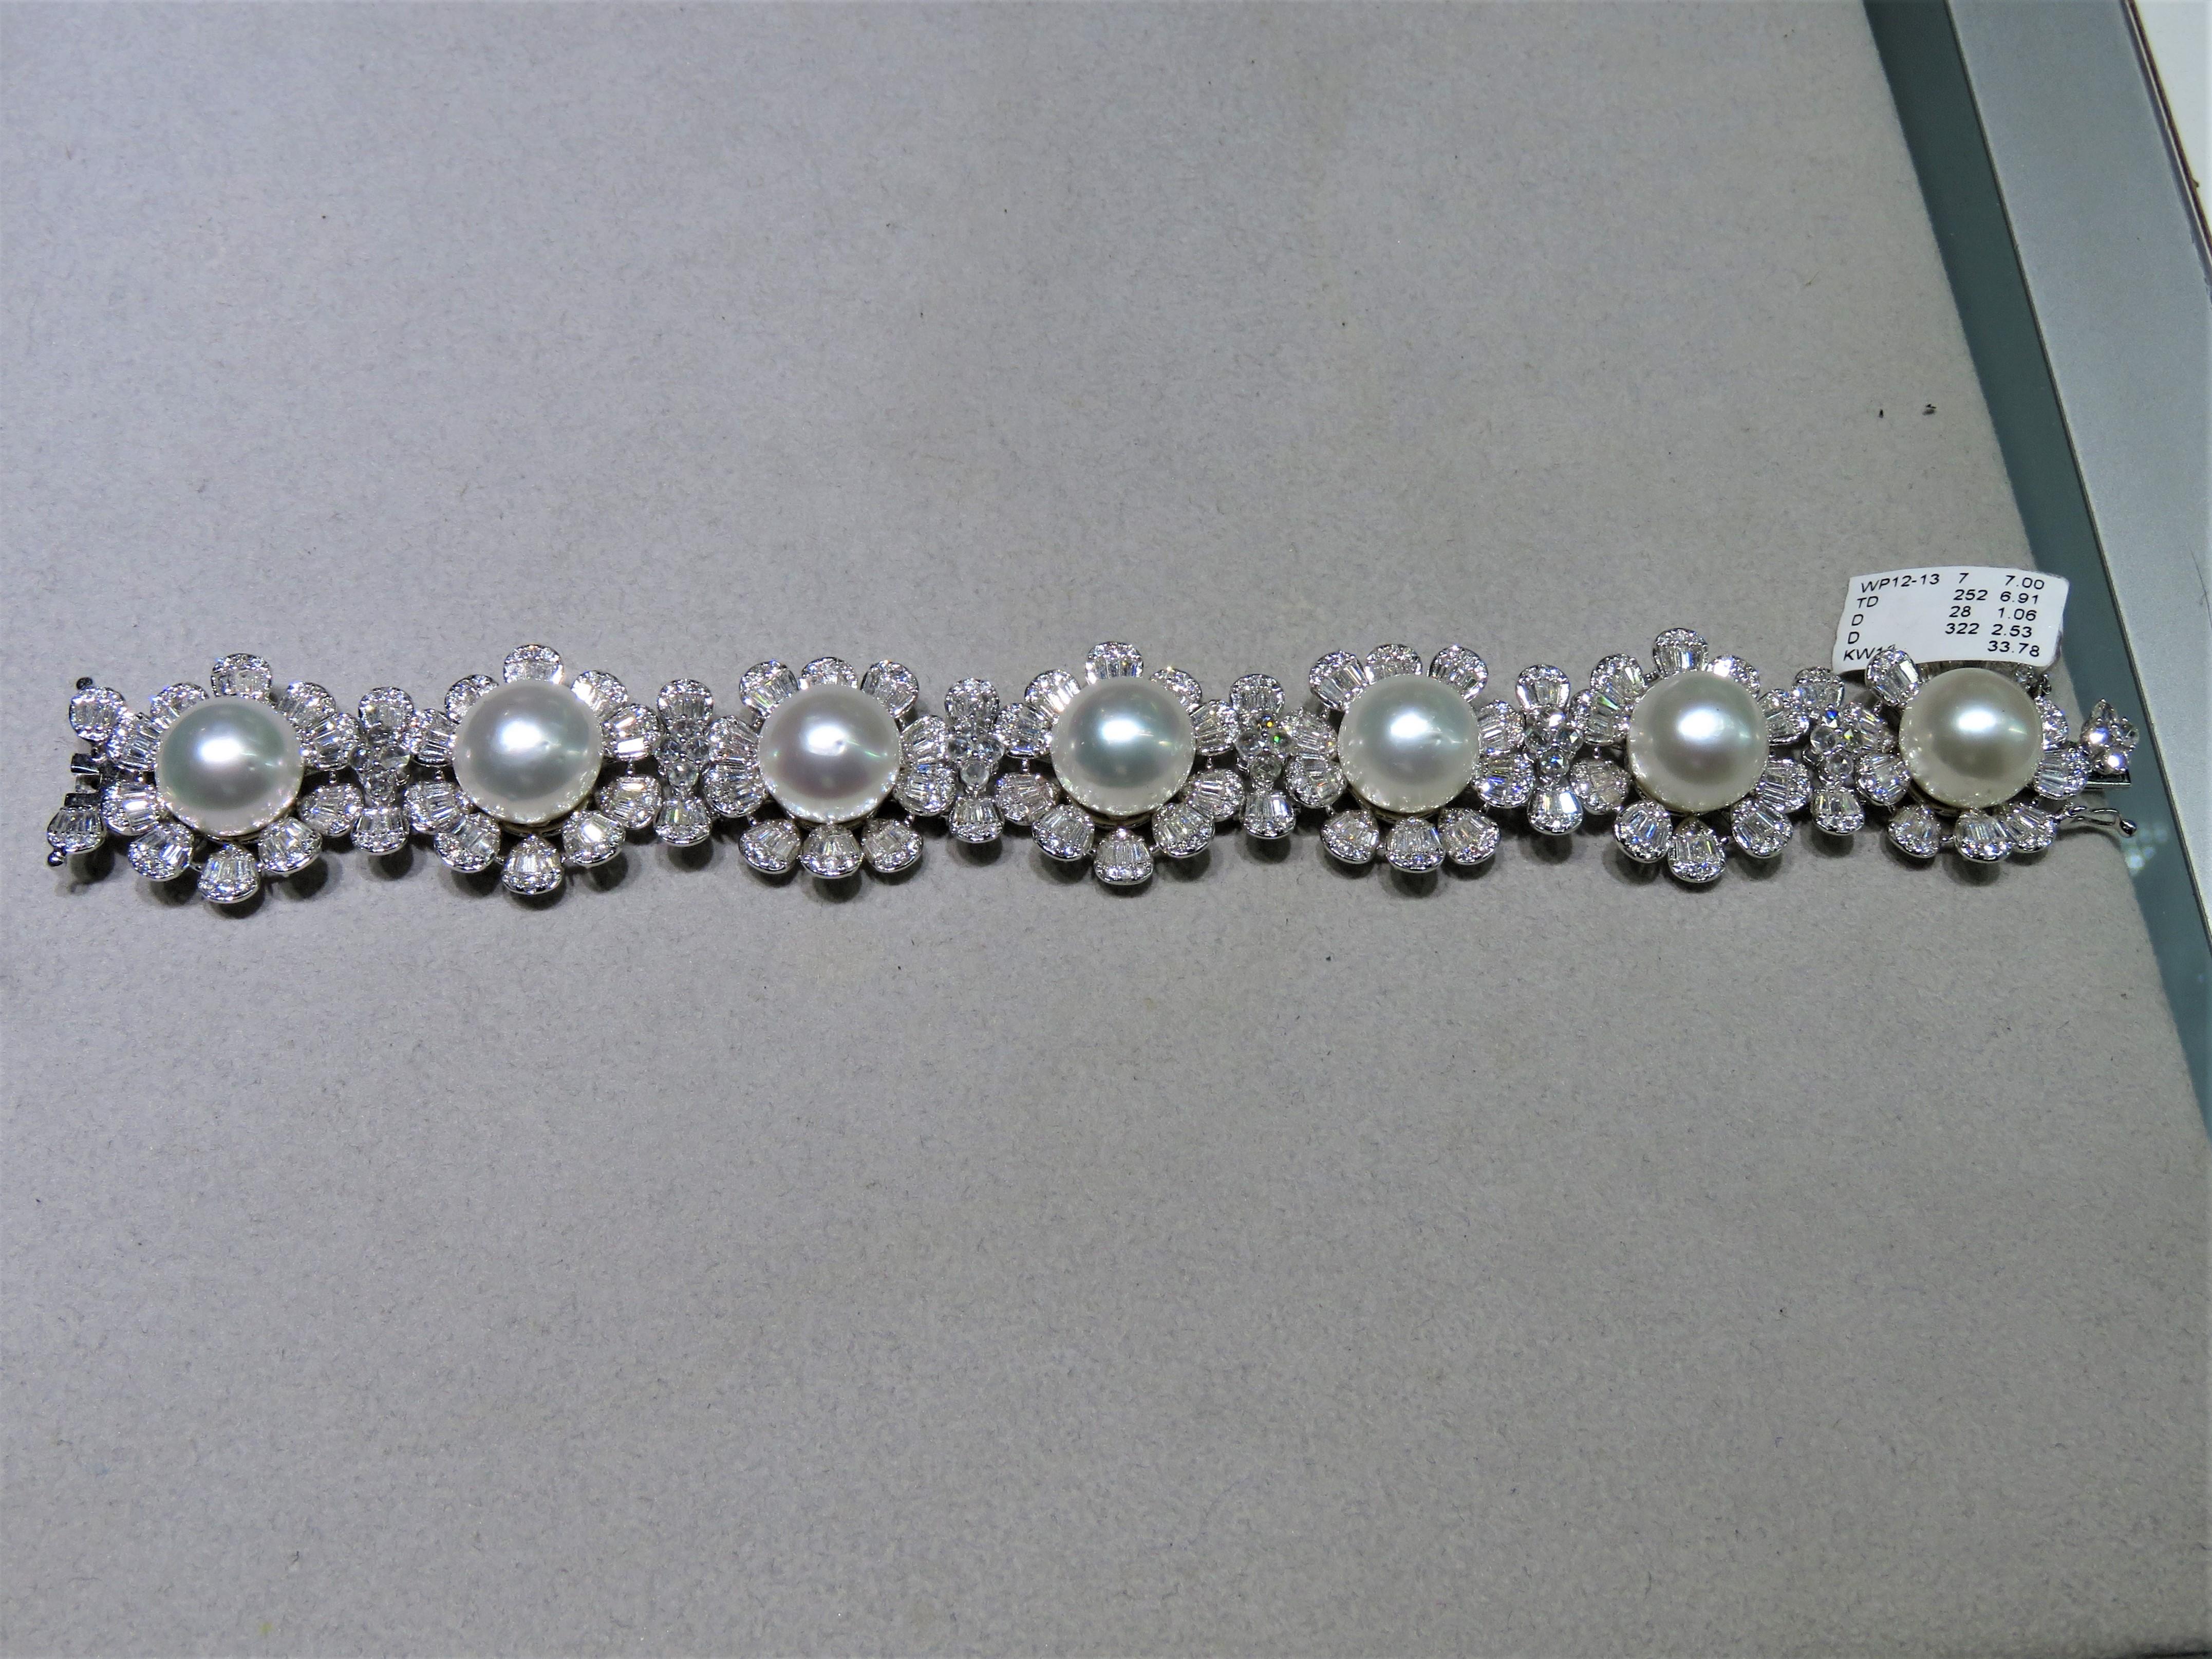 The Following Item we are offering is this Extremely Rare Beautiful 18KT Gold Fine Rare Large South Sea Pearl Fancy Diamond Bracelet. This Magnificent Bracelet is comprised of Rare Fine Large South Sea Pearls with Gorgeous Glittering Diamonds!!!